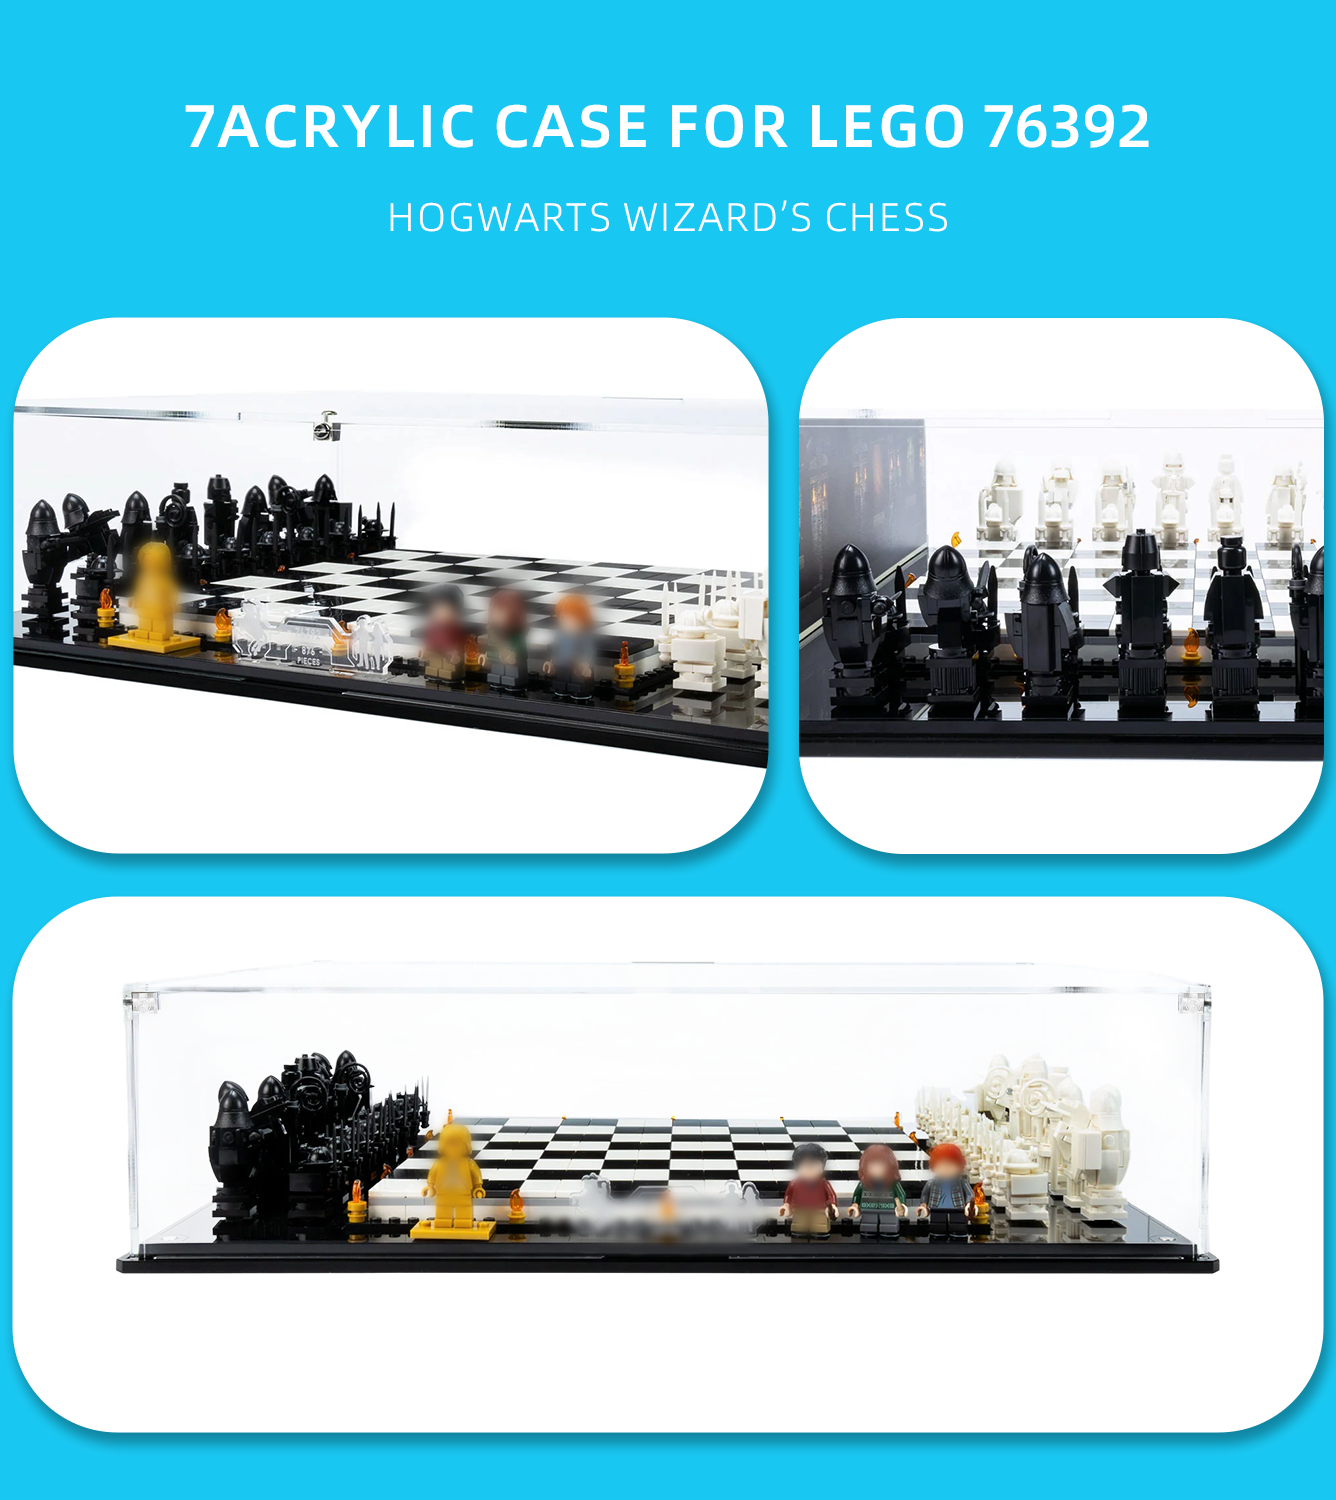 Display Case for Lego Hogwarts Wizard's Chess 76392